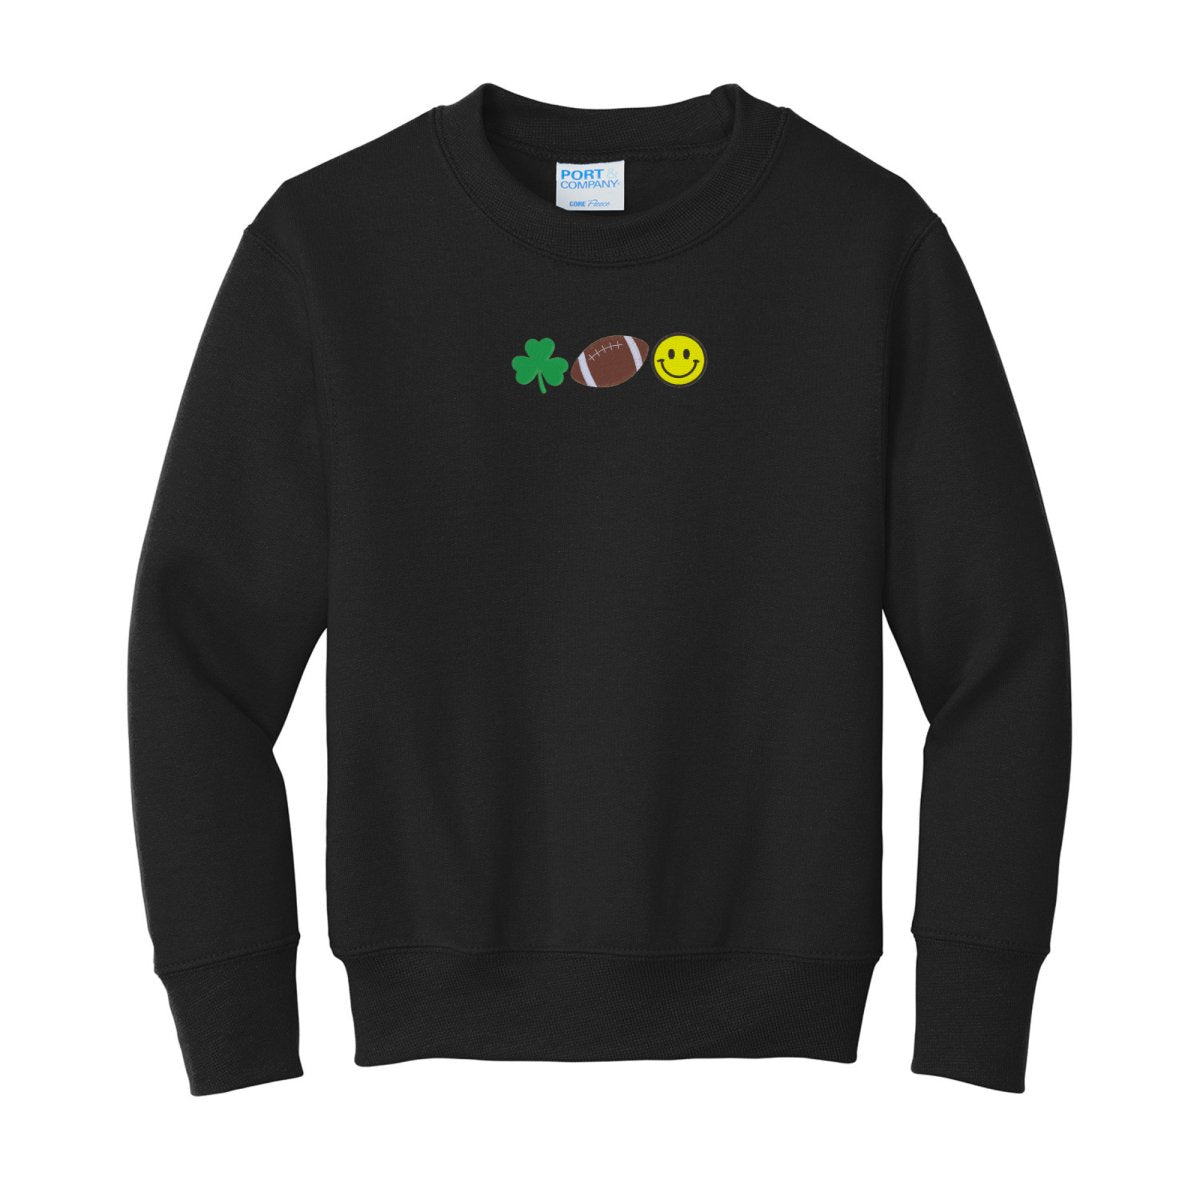 Kids Make It Yours™ 'Favorite Things Icons' Embroidered Sweatshirt - United Monograms